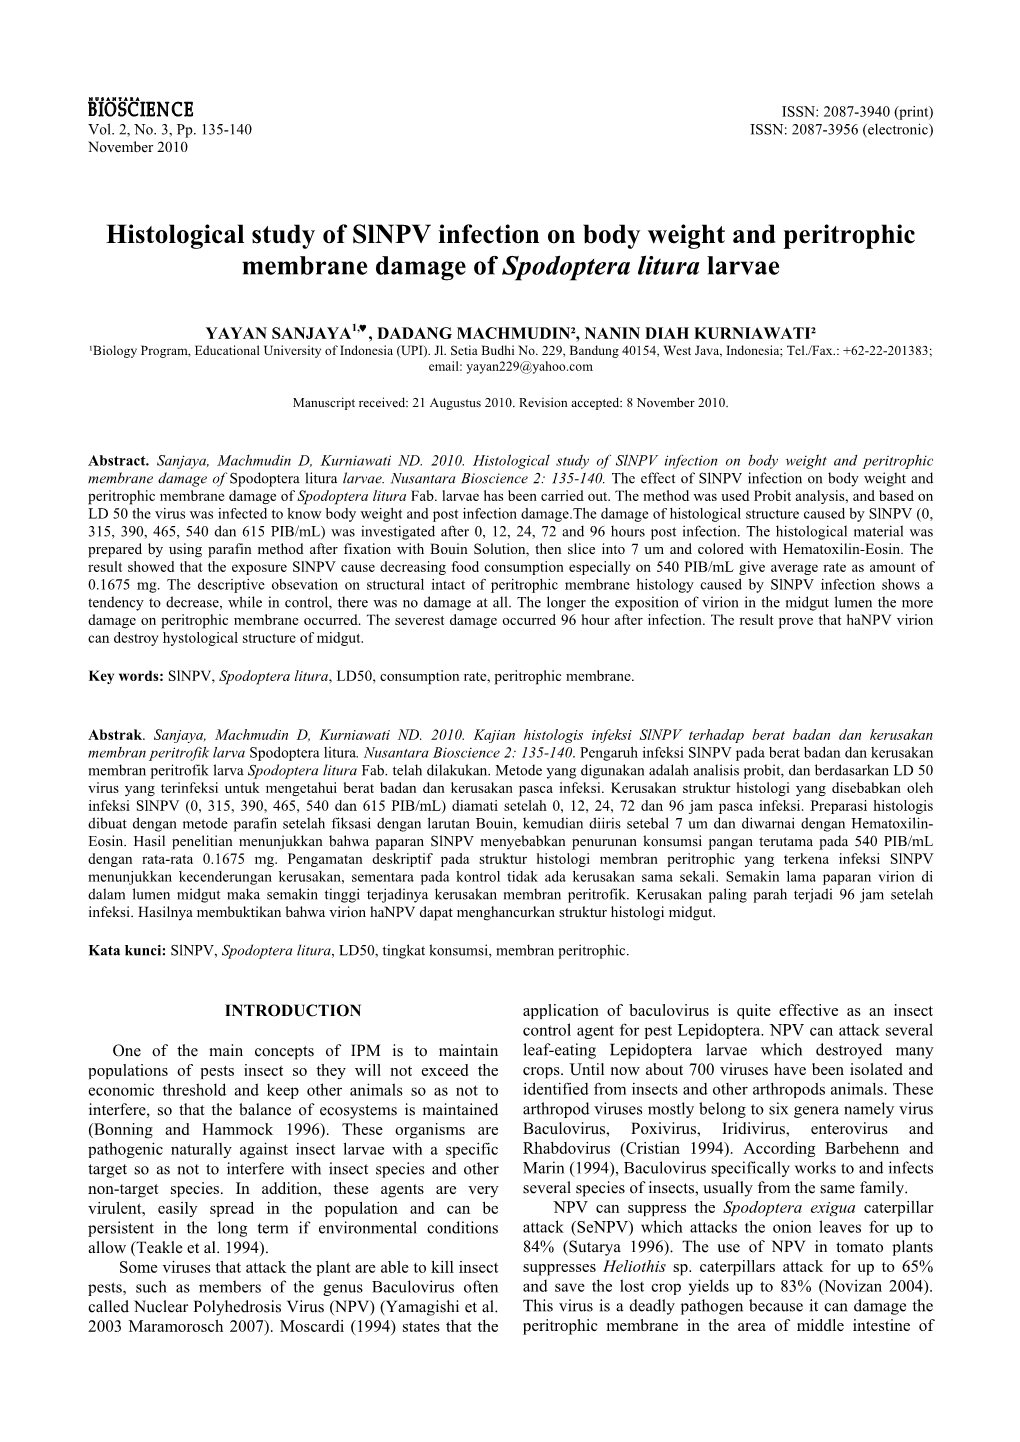 Histological Study of Slnpv Infection on Body Weight and Peritrophic Membrane Damage of Spodoptera Litura Larvae